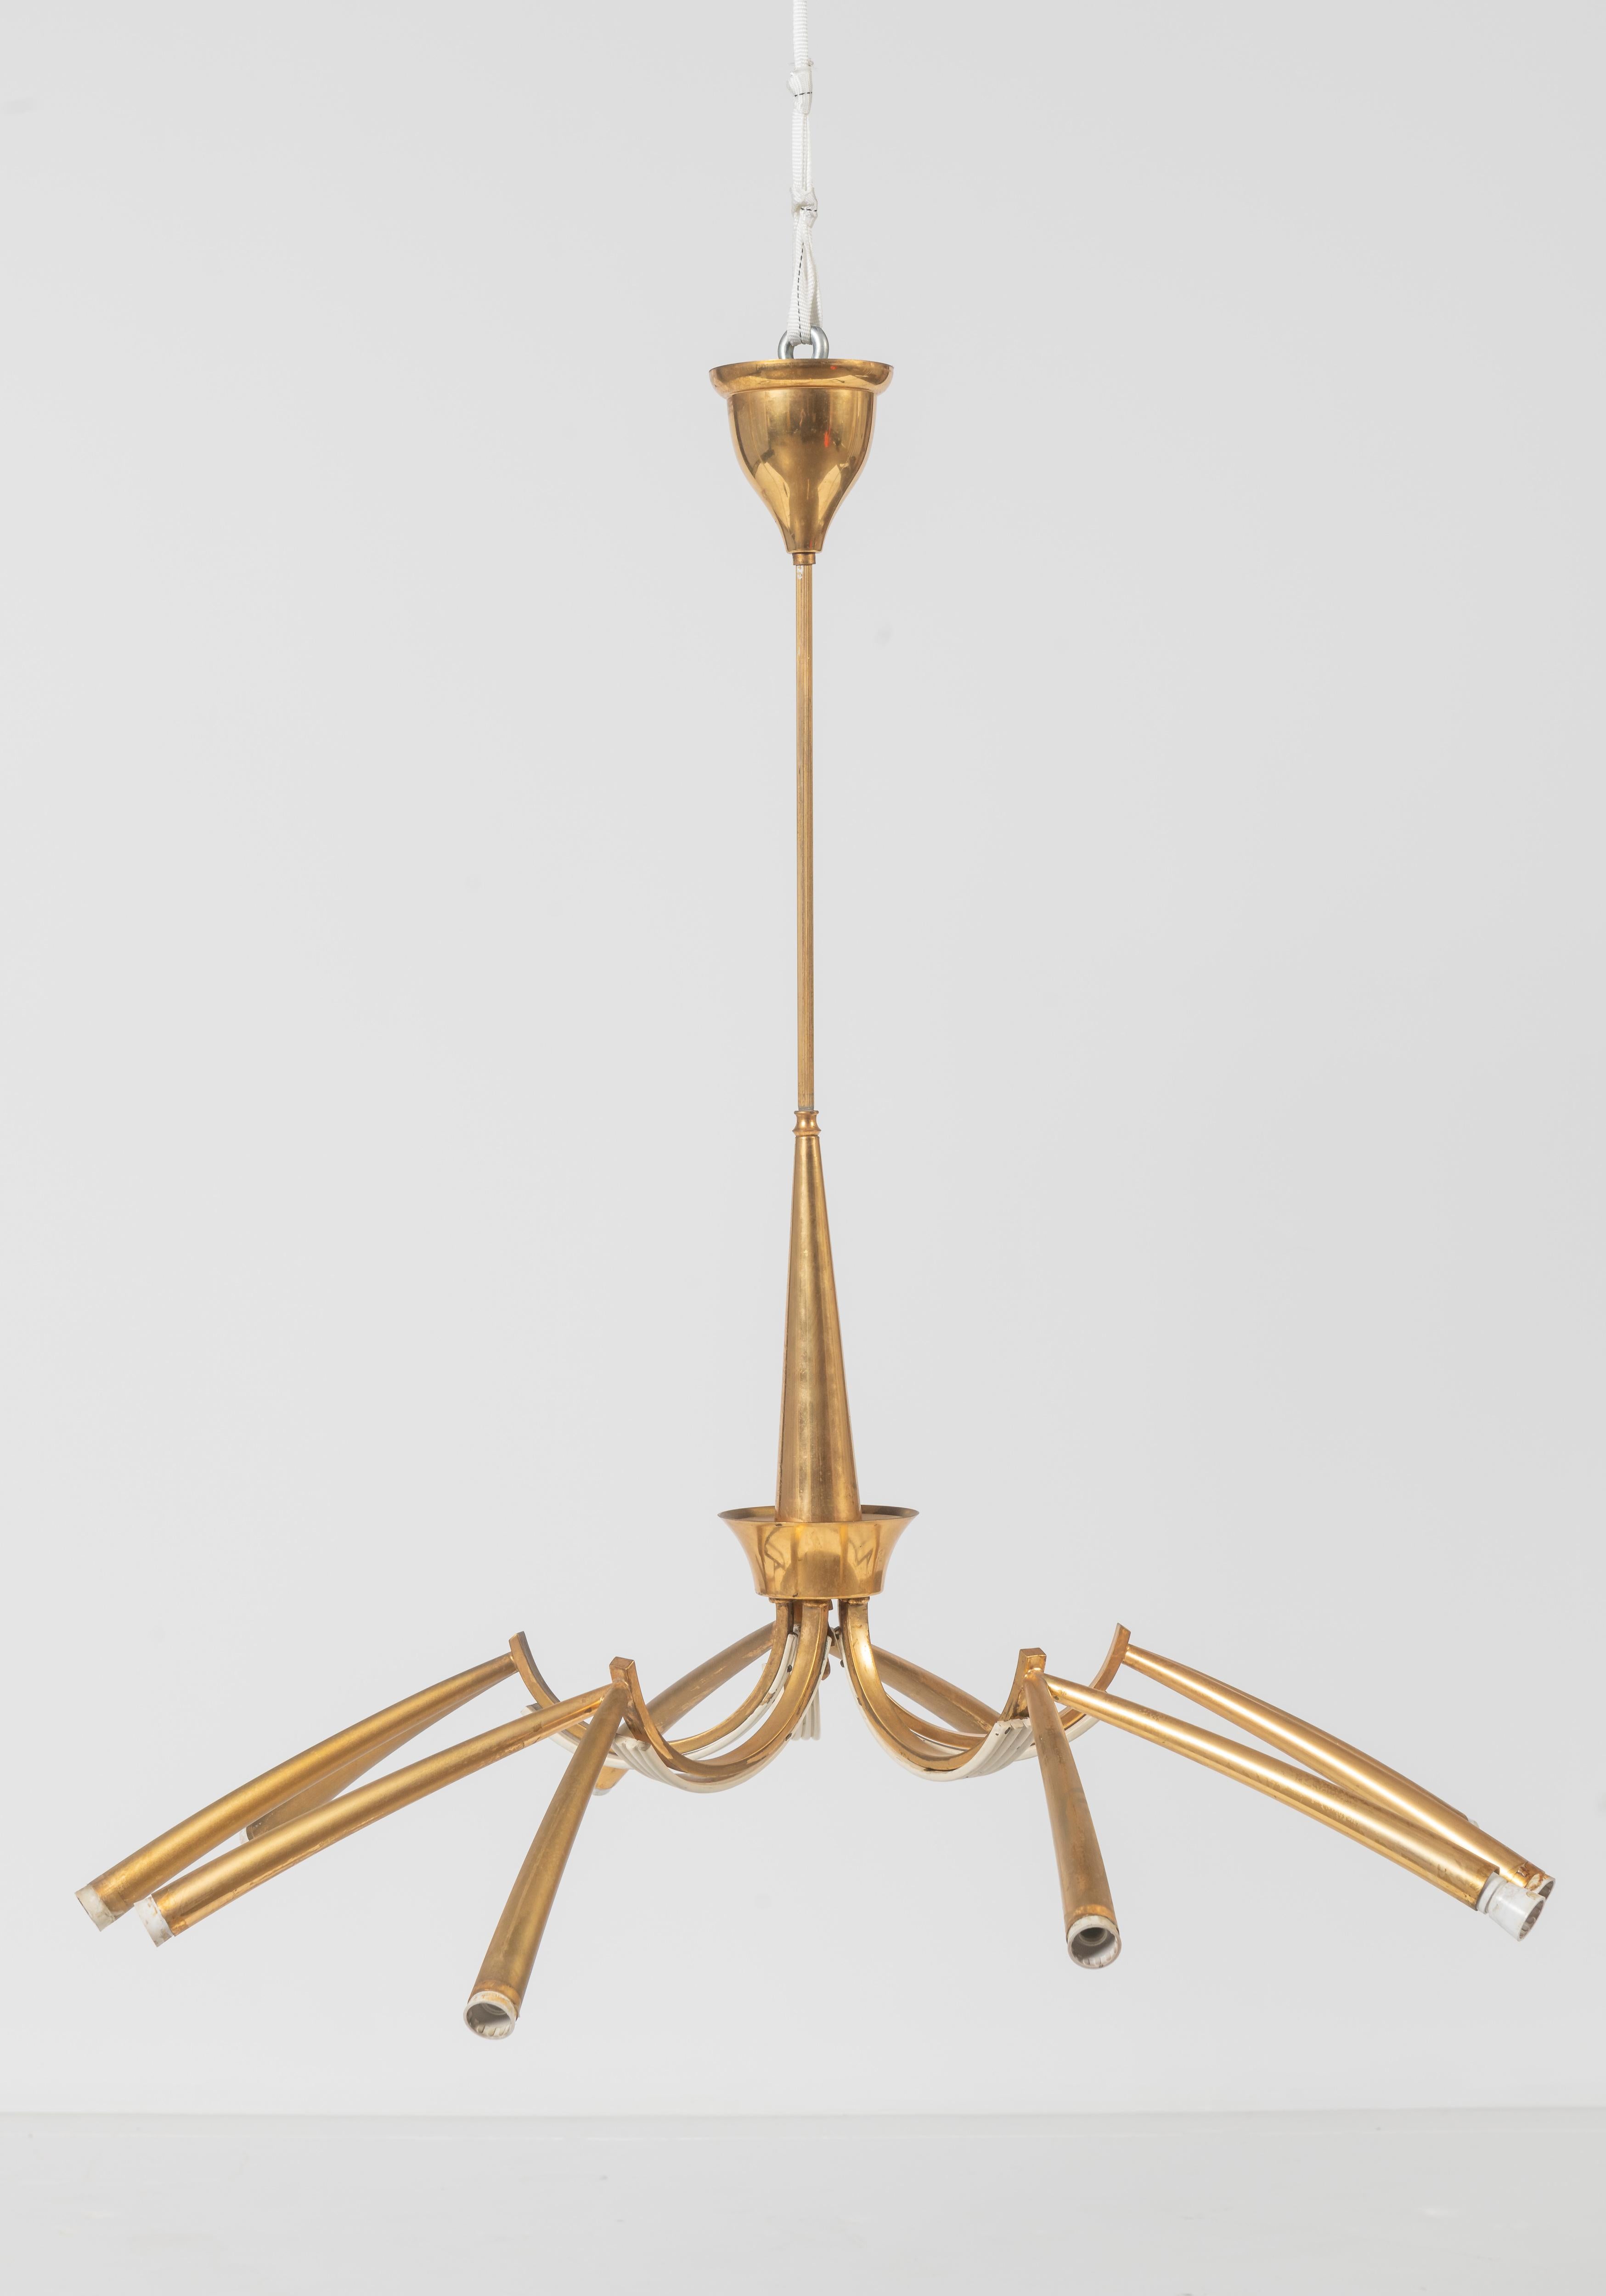 Lovely suspension lamp in polished brass with five arms and 10 lights. Great addition to add modern glamor overhead.